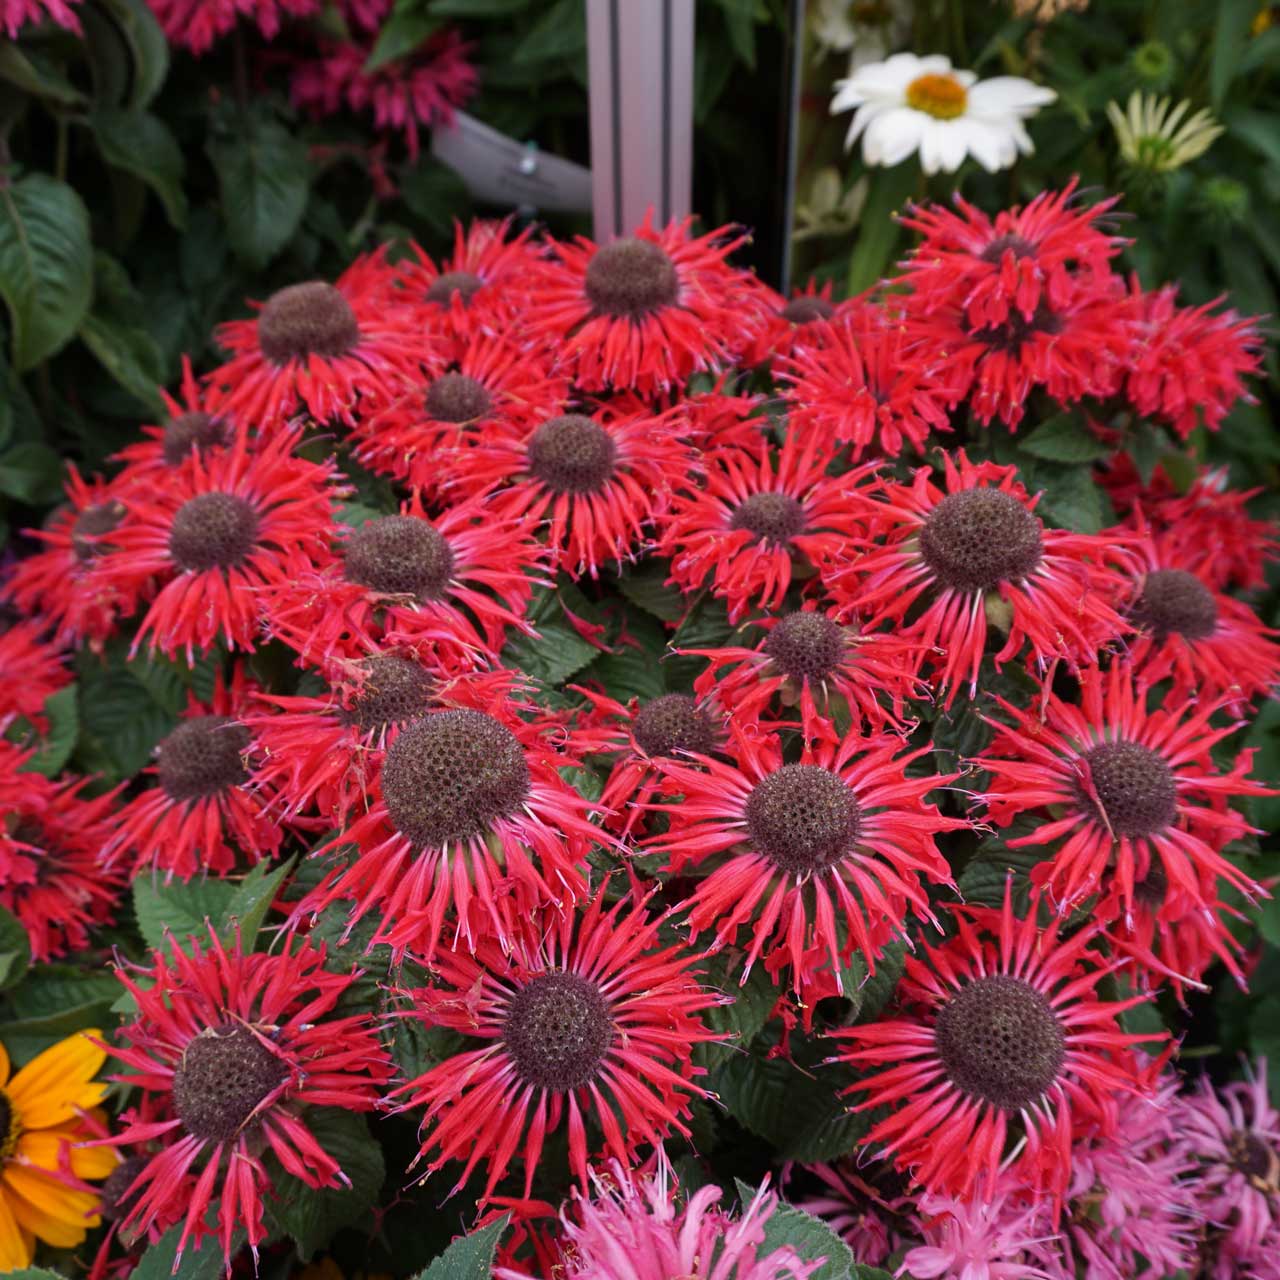 This recent selection, part of the Bee-You Series, is compact and features deep red flowers, arranged in large, shaggy heads. Foliage is delightfully fragrant, and significantly more resistant to powdery mildew than most older varieties.